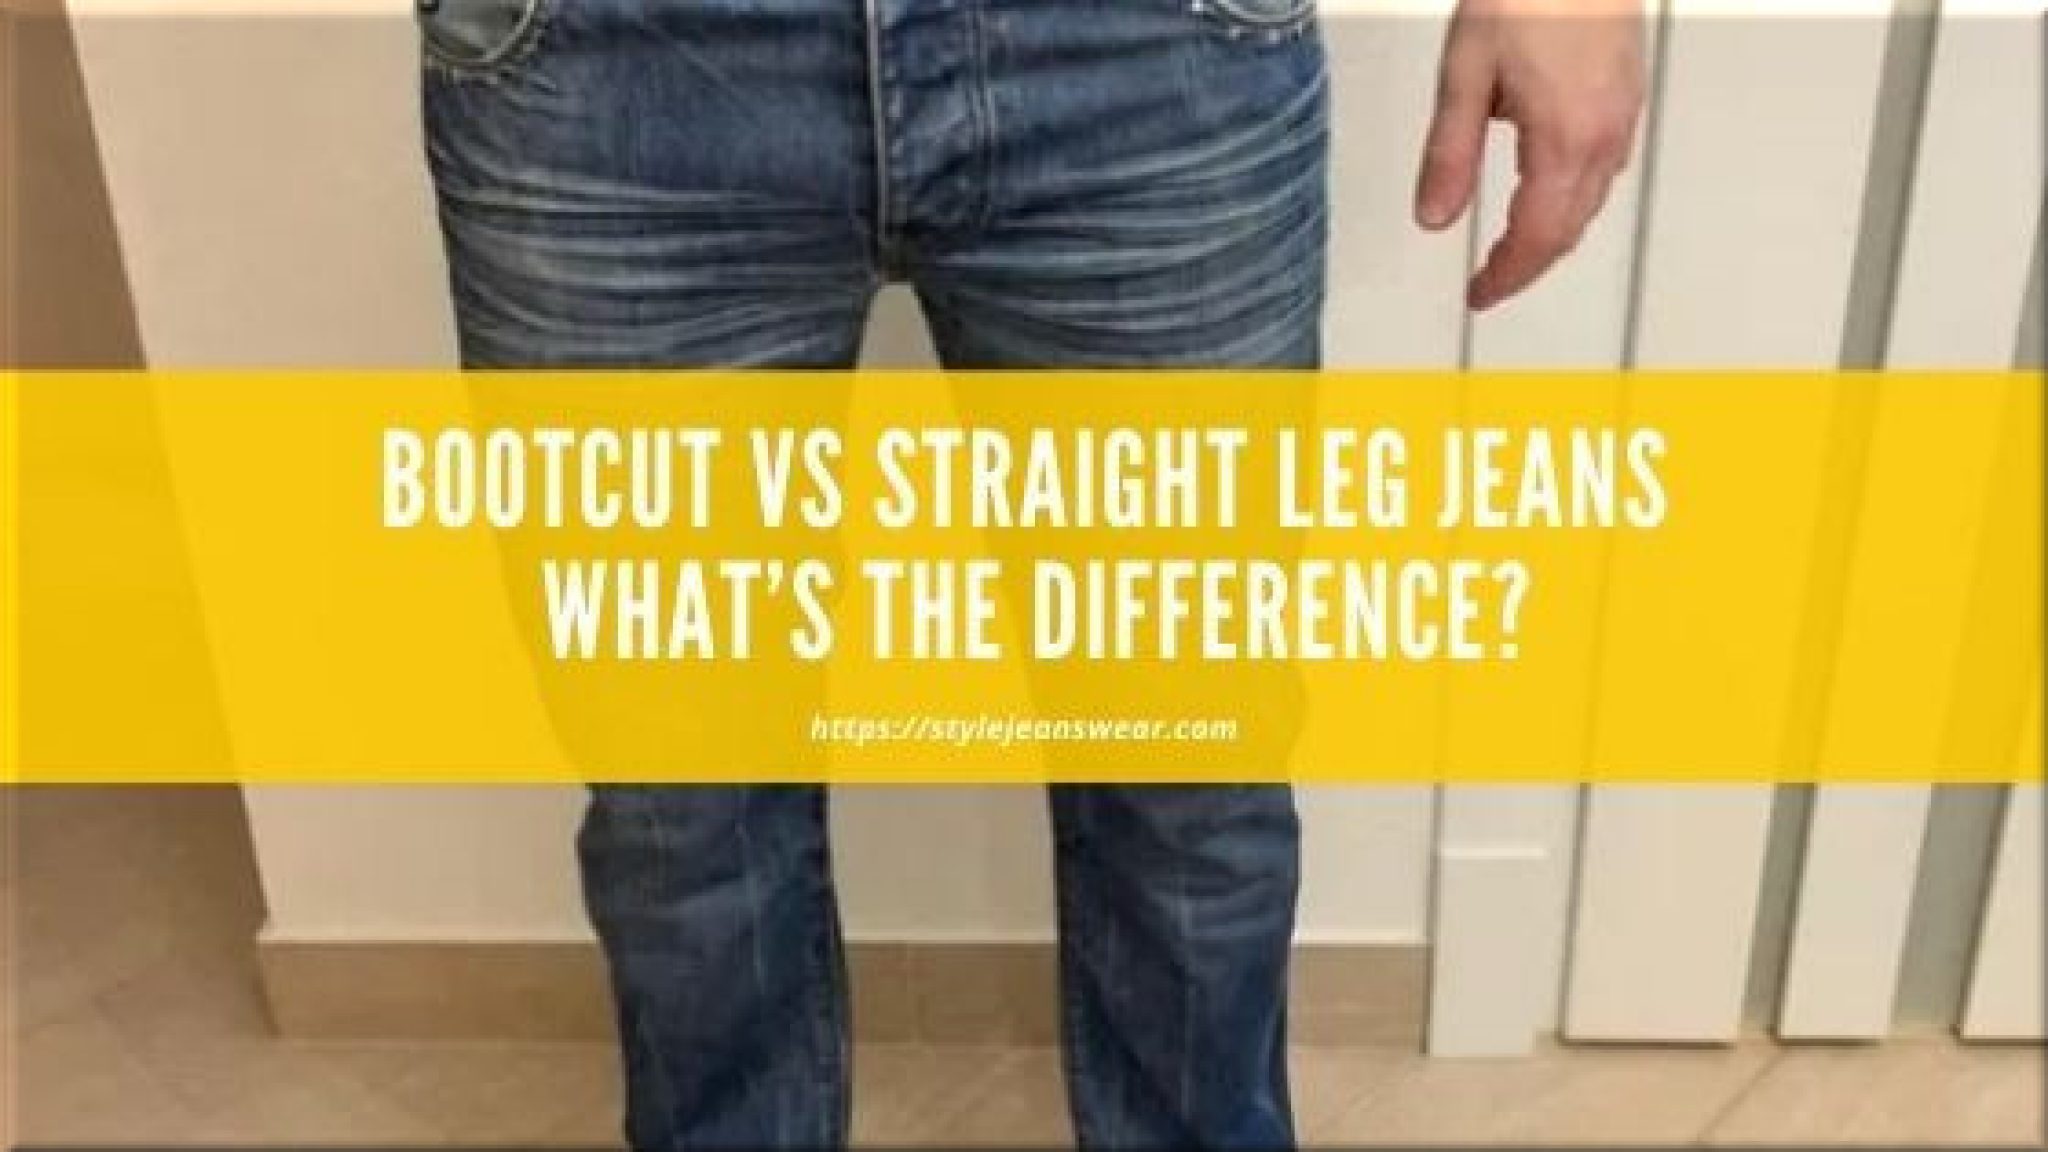 Bootcut vs Straight Leg Jeans: What's the Difference? | Style Jeans Wear